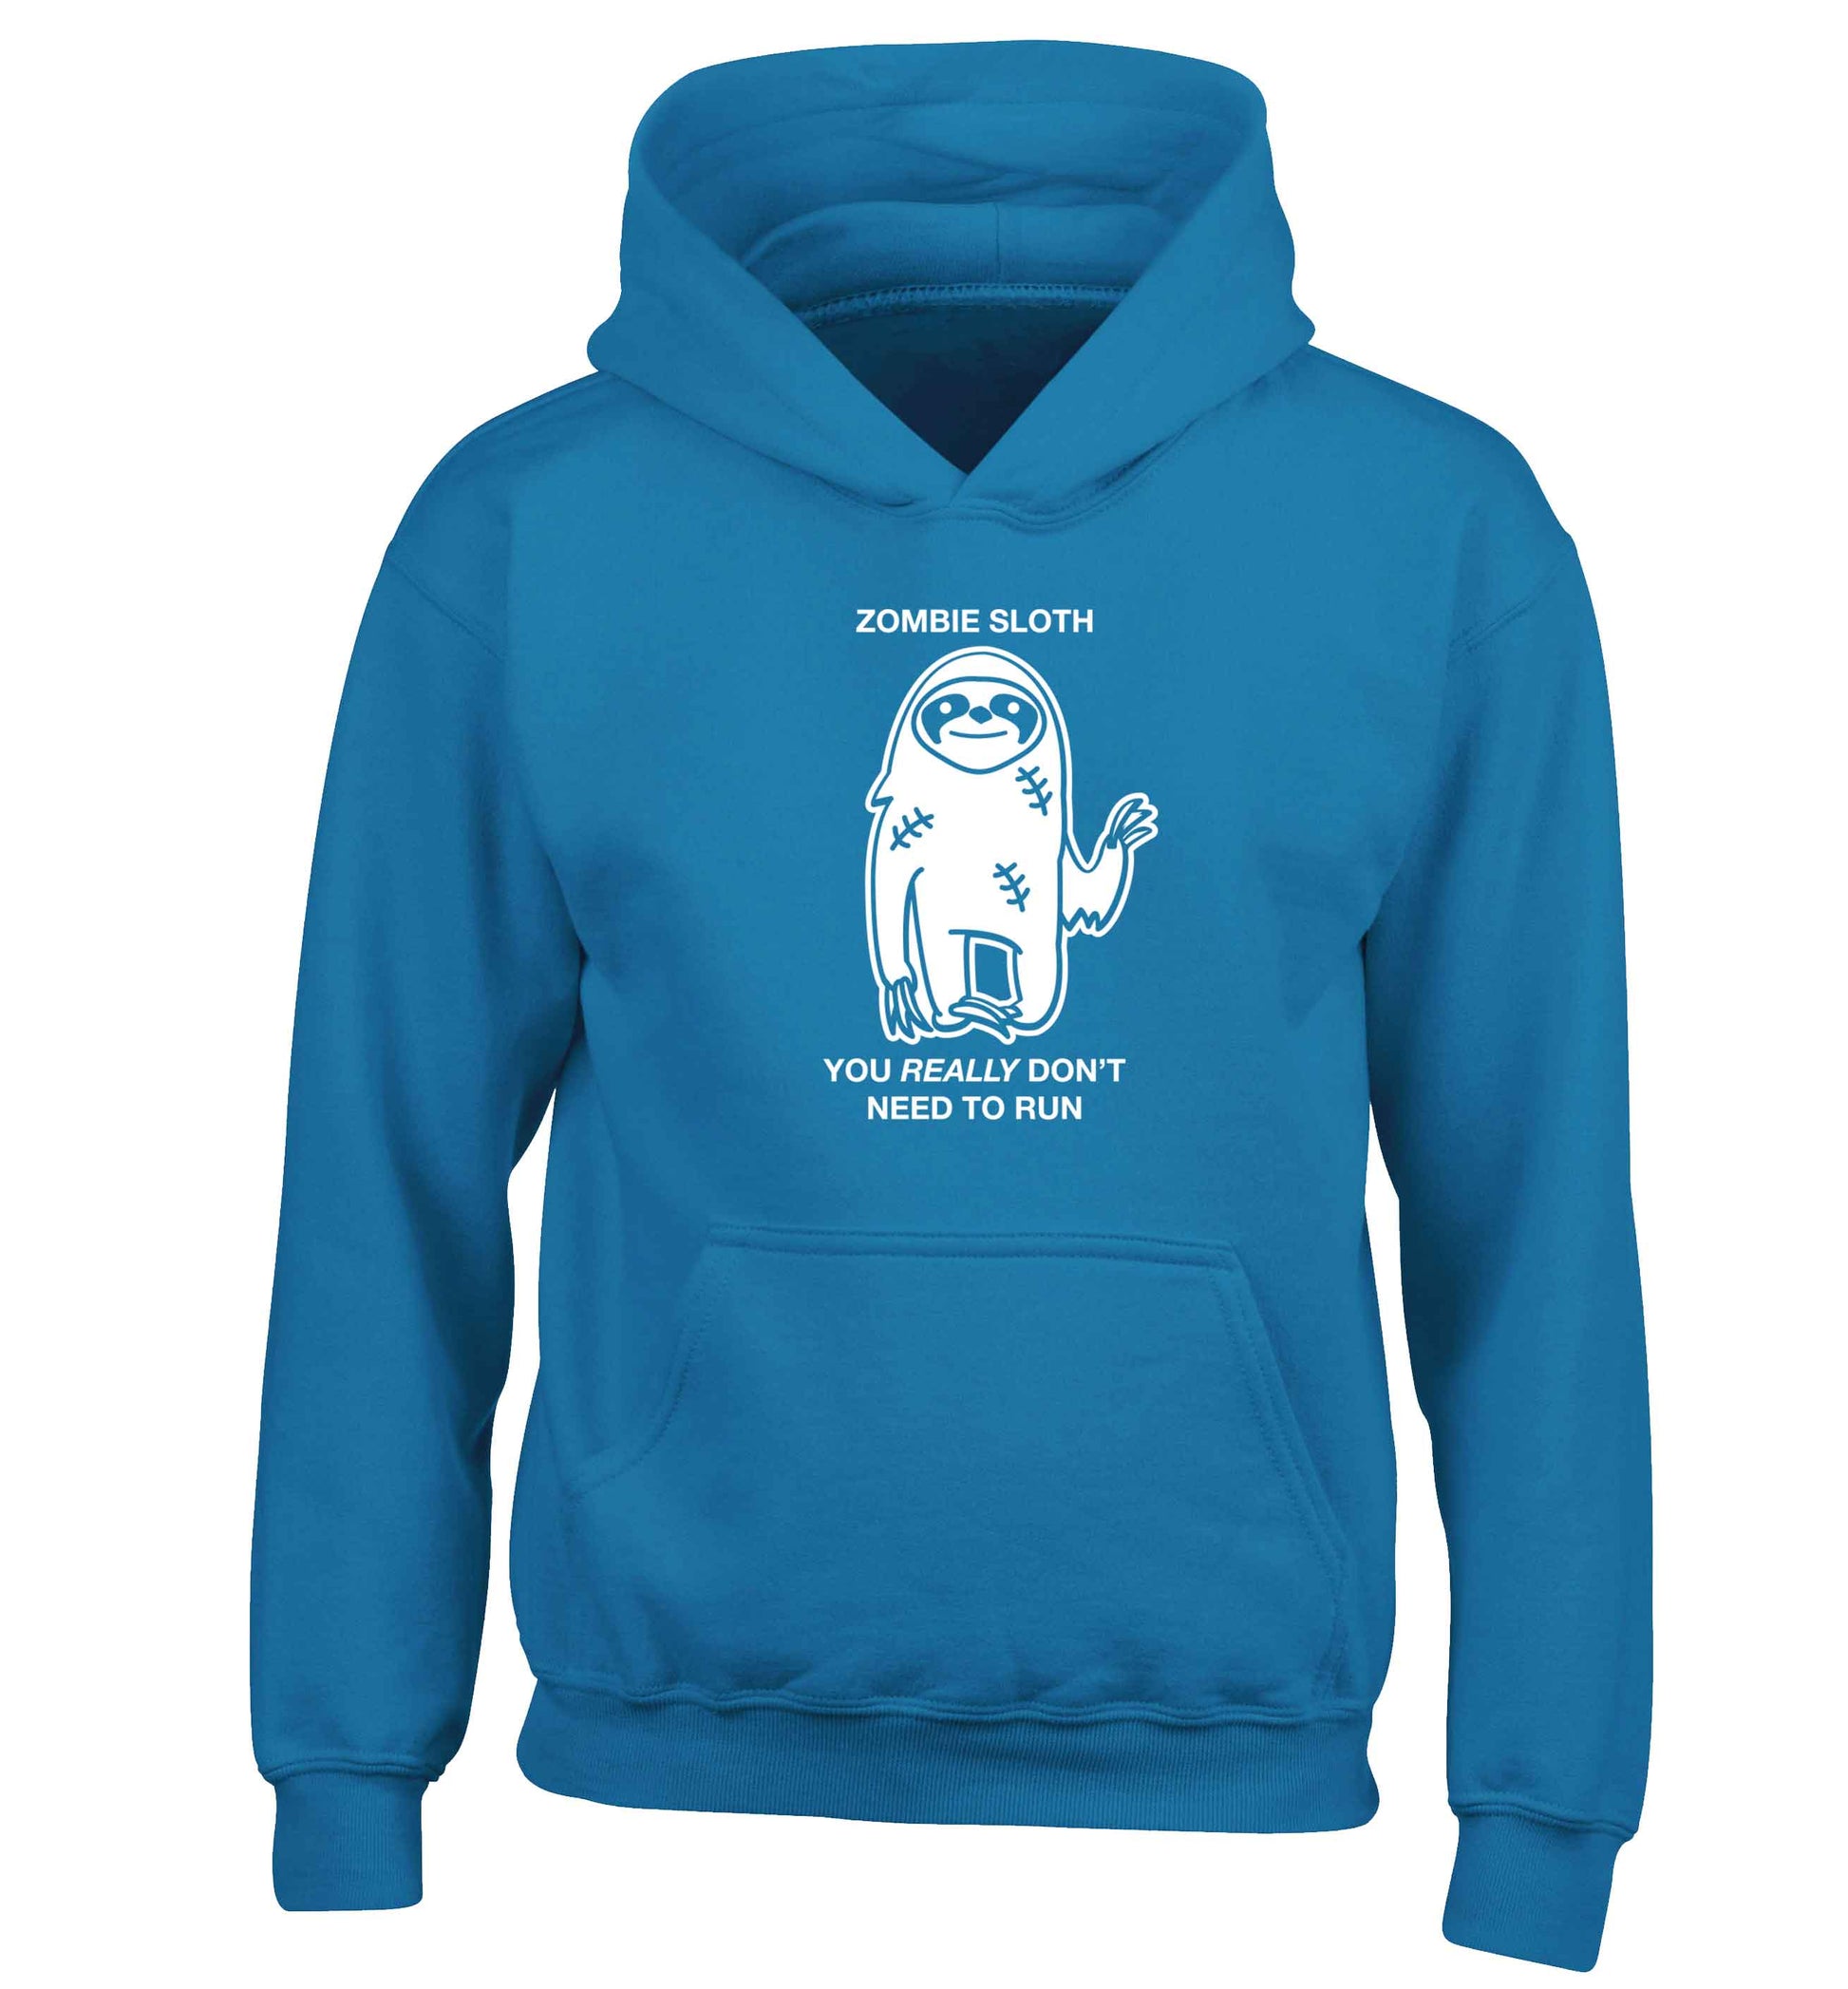 Zombie sloth you really don't need to run children's blue hoodie 12-13 Years